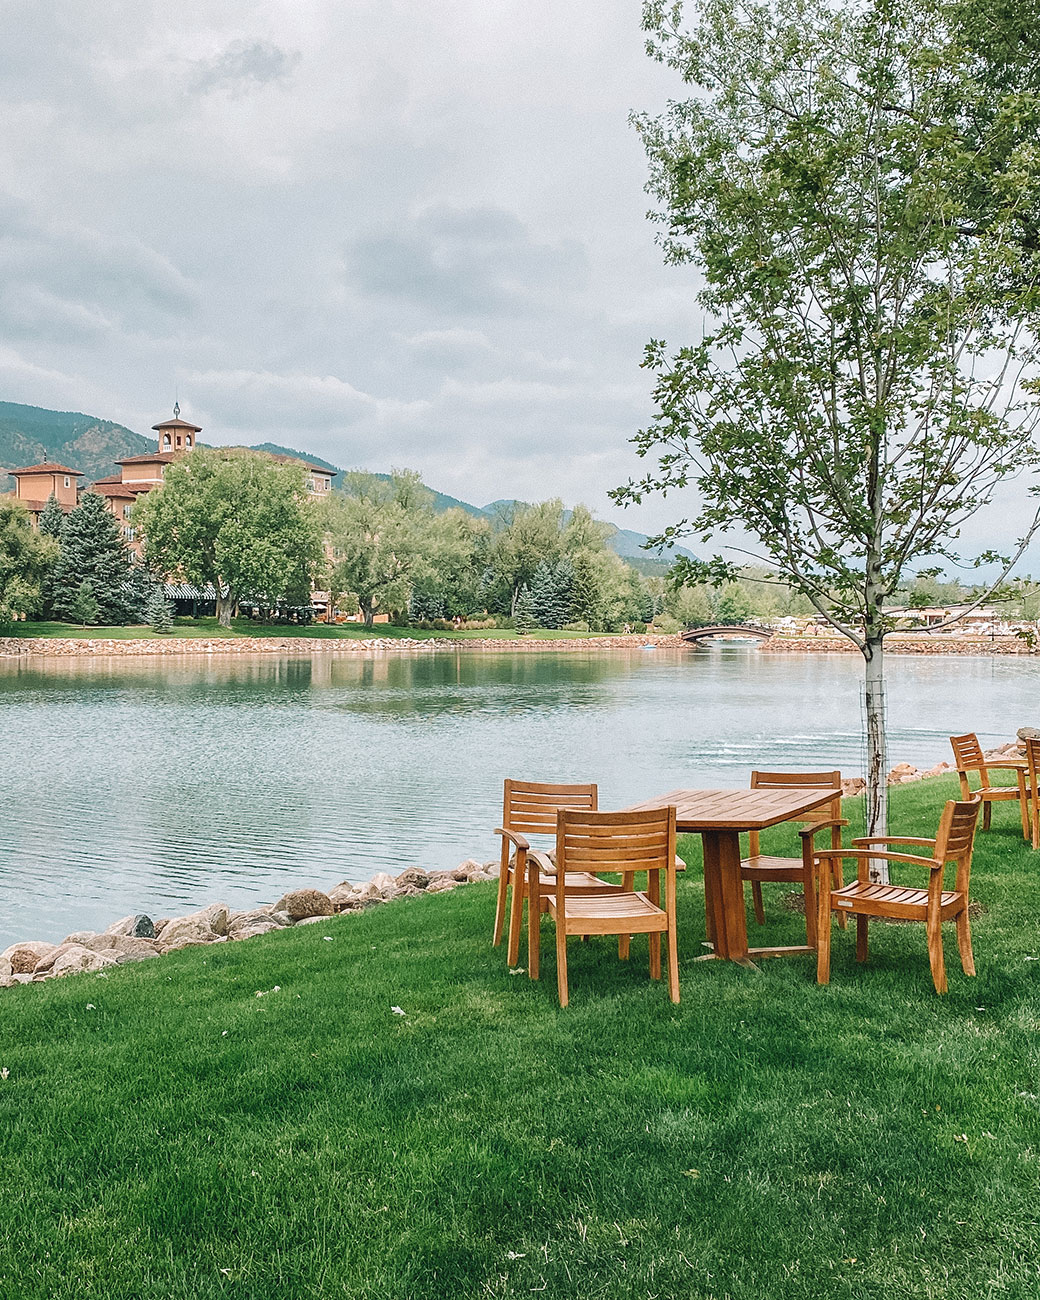 The Broadmoor | The Broadmoor hotel | The Broadmoor resort | Colorado Springs resorts | Things to do at The Broadmoor | Travel Blogger | Bubbly Moments